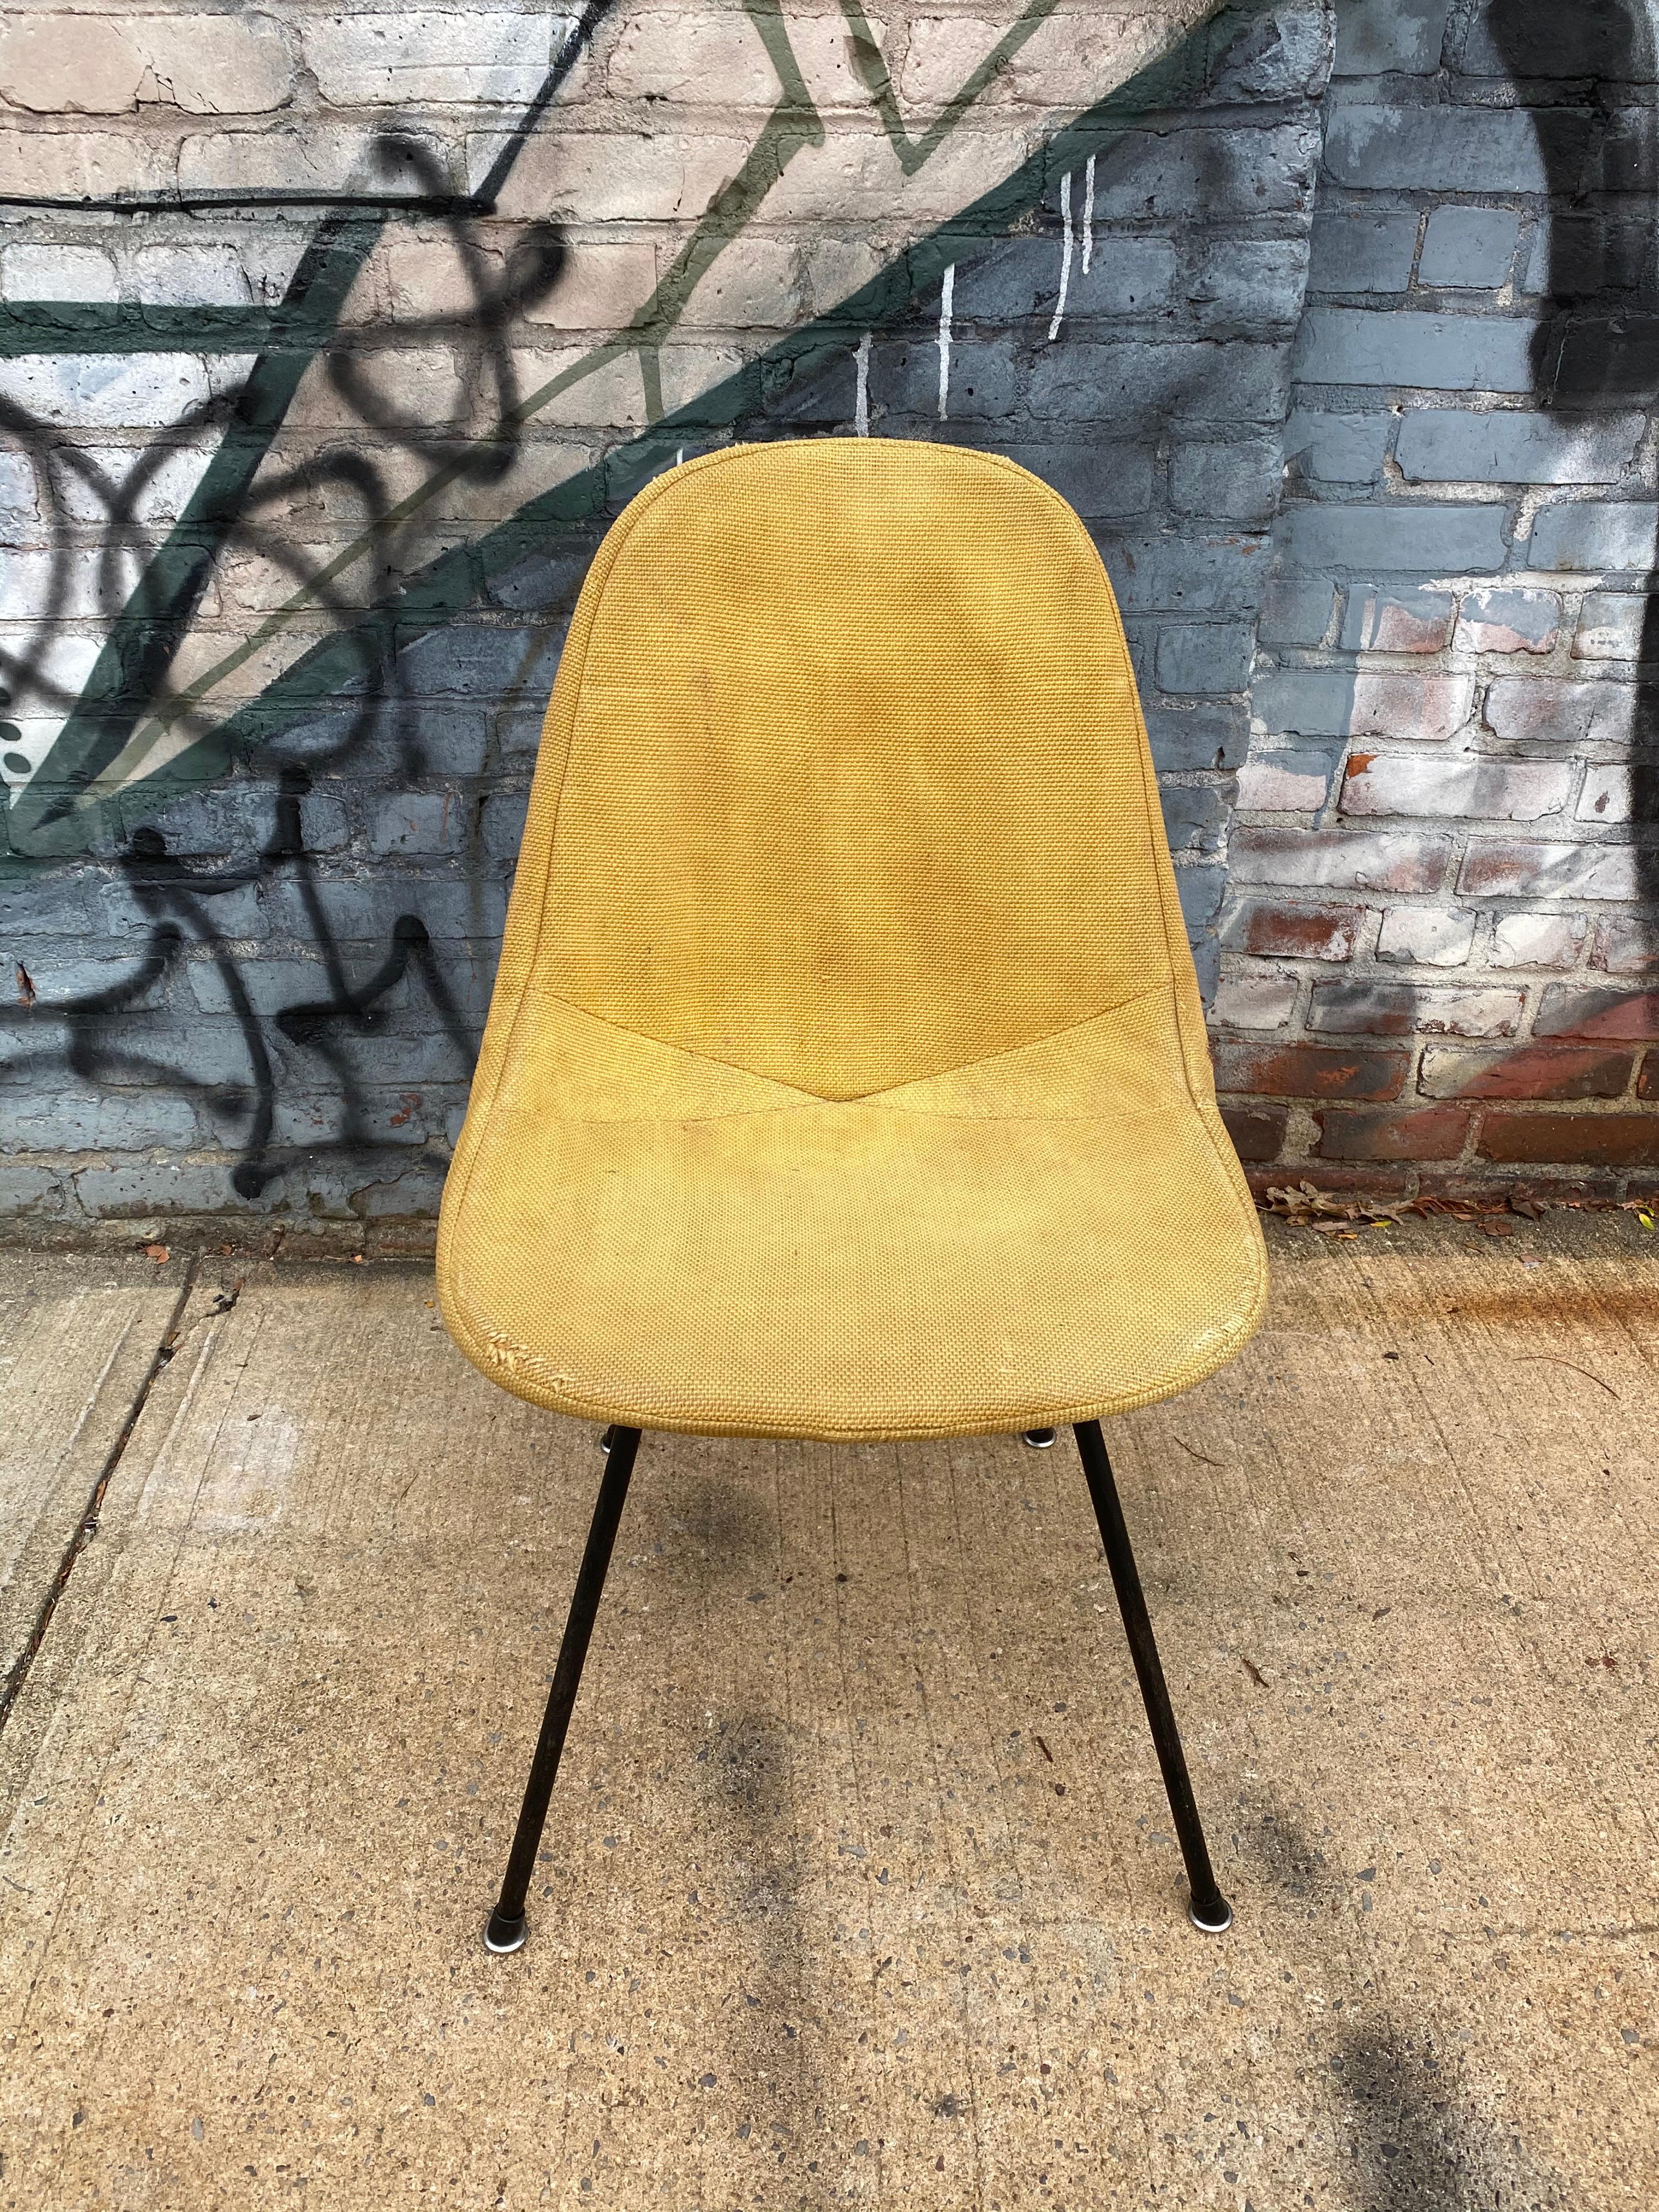 Early wire chair designed by Charles and Ray Eames and made by Herman Miller. Dating to the early 1950s. Model DKX-1 with removable cover. Chair in good condition based on age with appropriate and expected wear. Beautiful patina and character. A